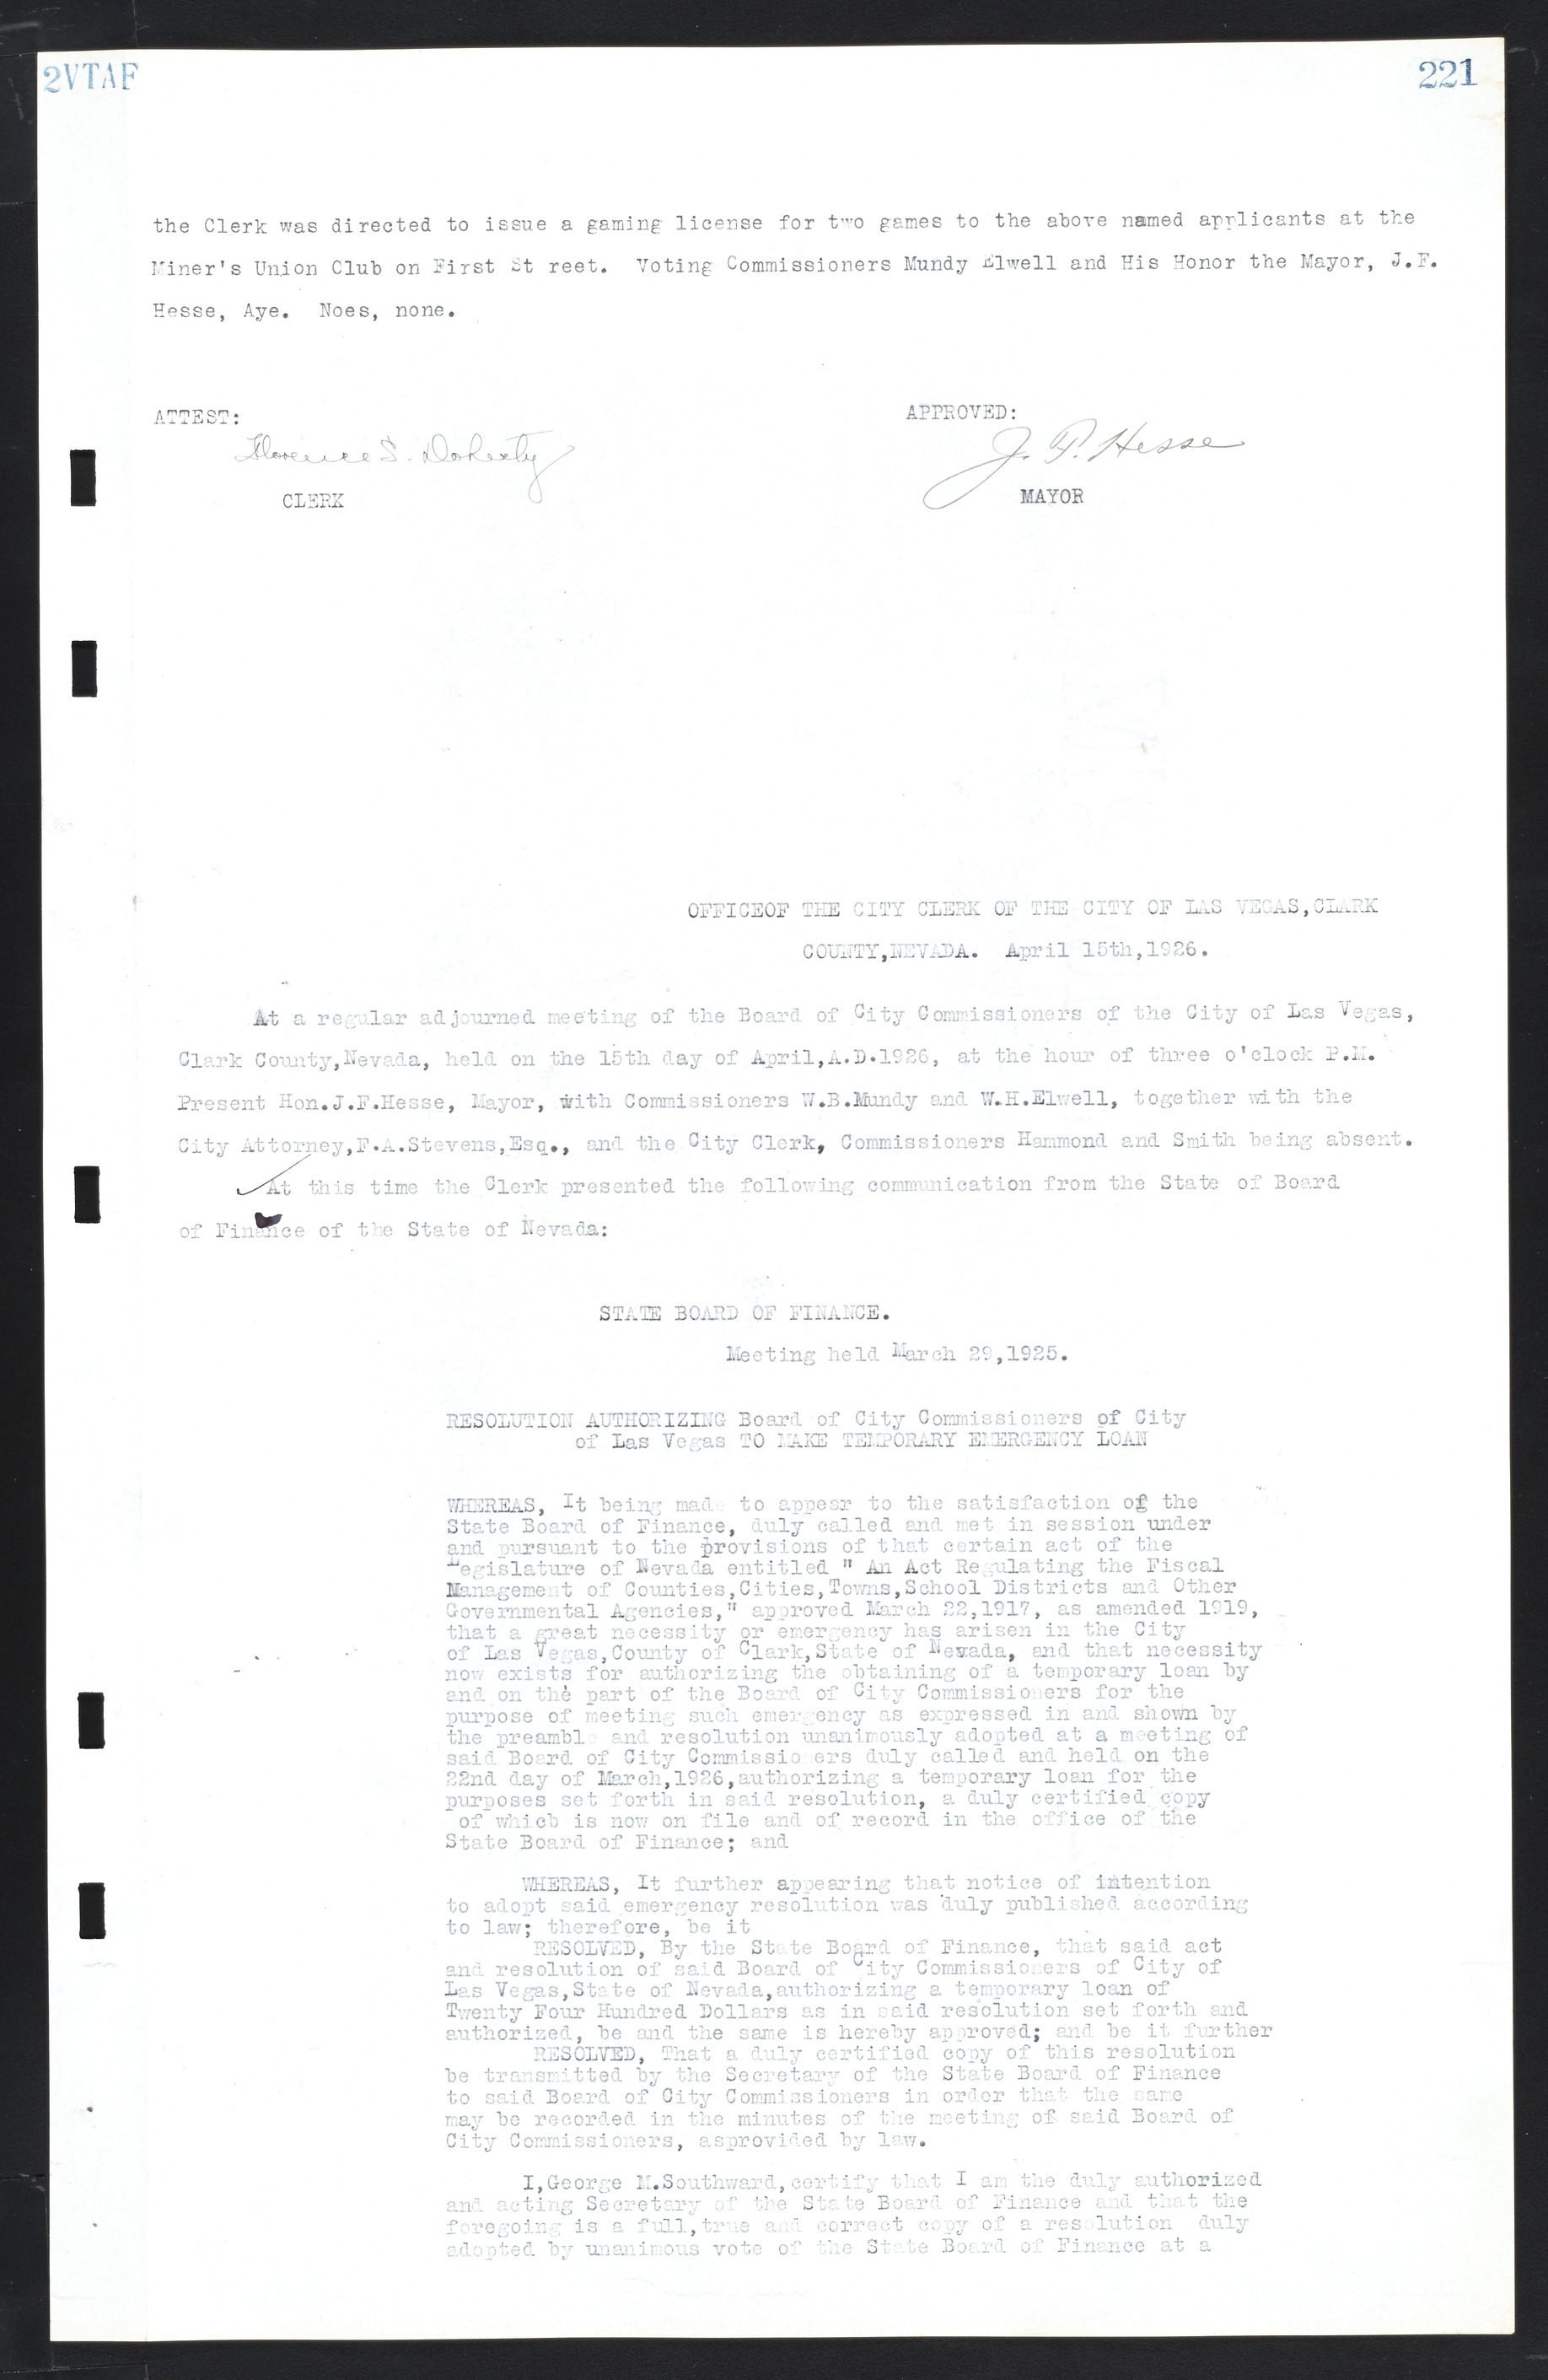 Las Vegas City Commission Minutes, March 1, 1922 to May 10, 1929, lvc000002-228